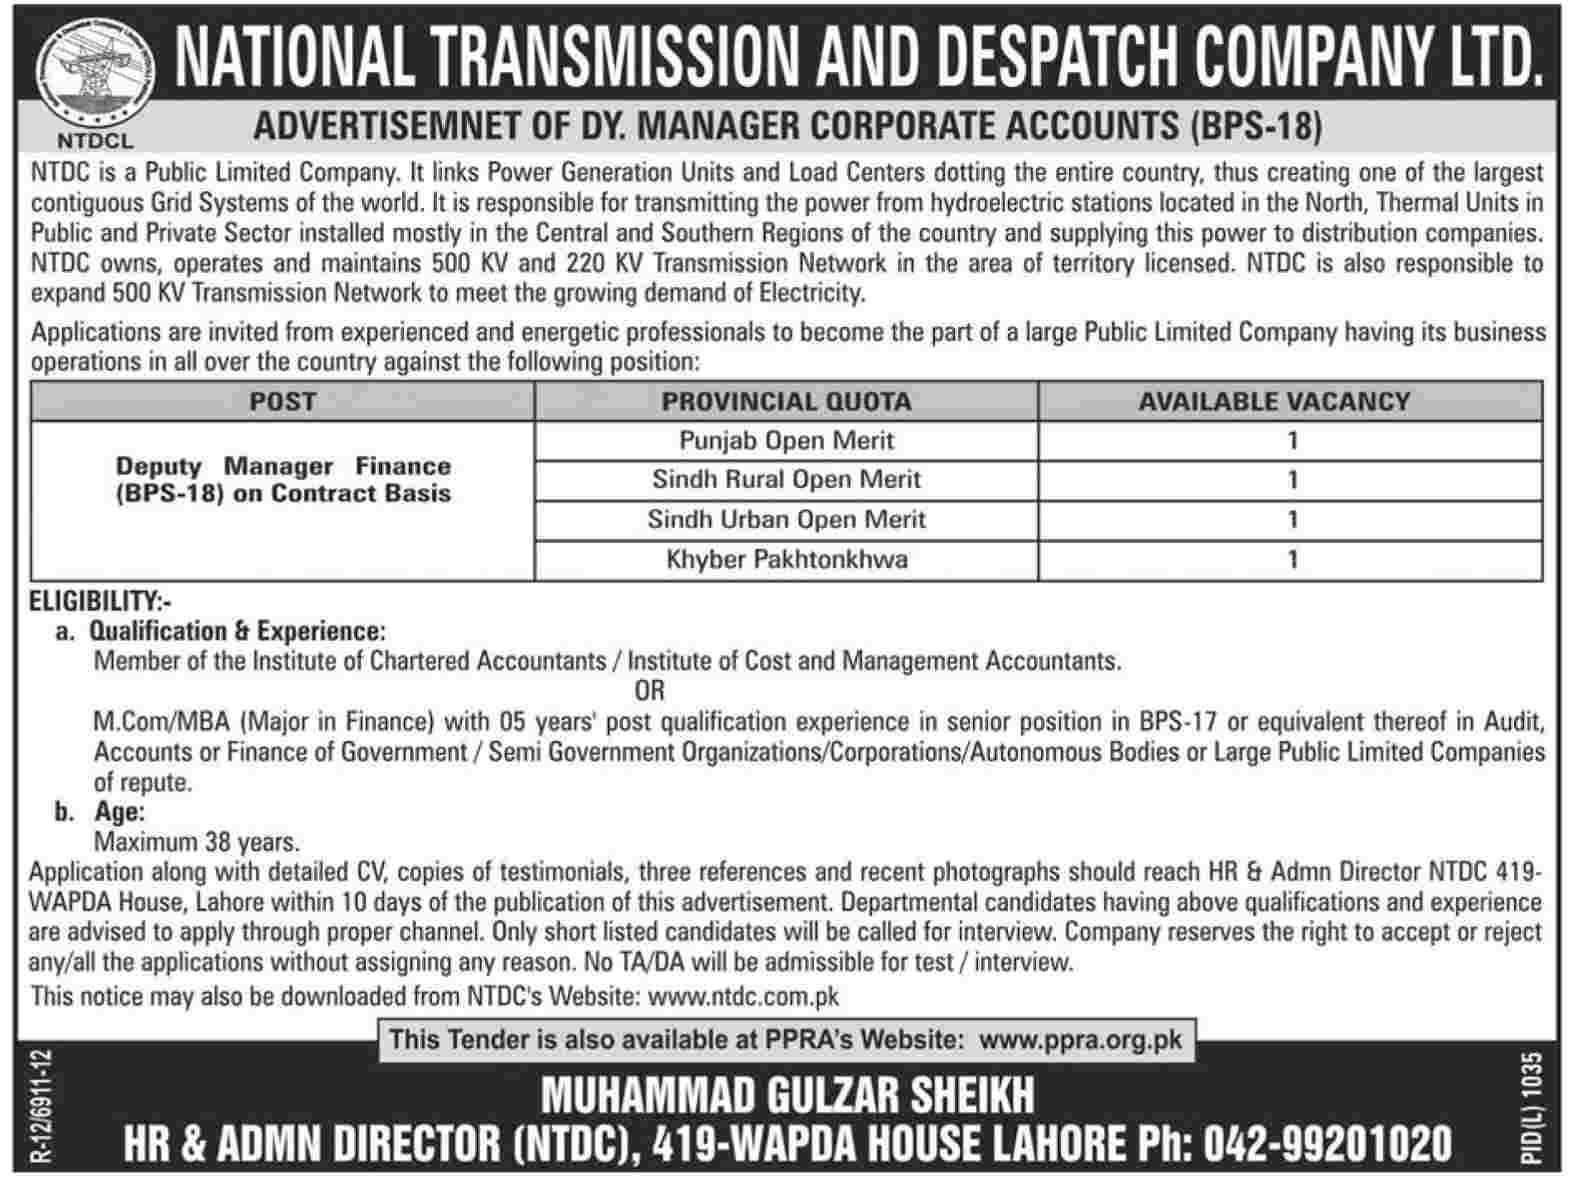 Deputy Manager Finance Required in National Transmission and Dispatch Company Ltd.